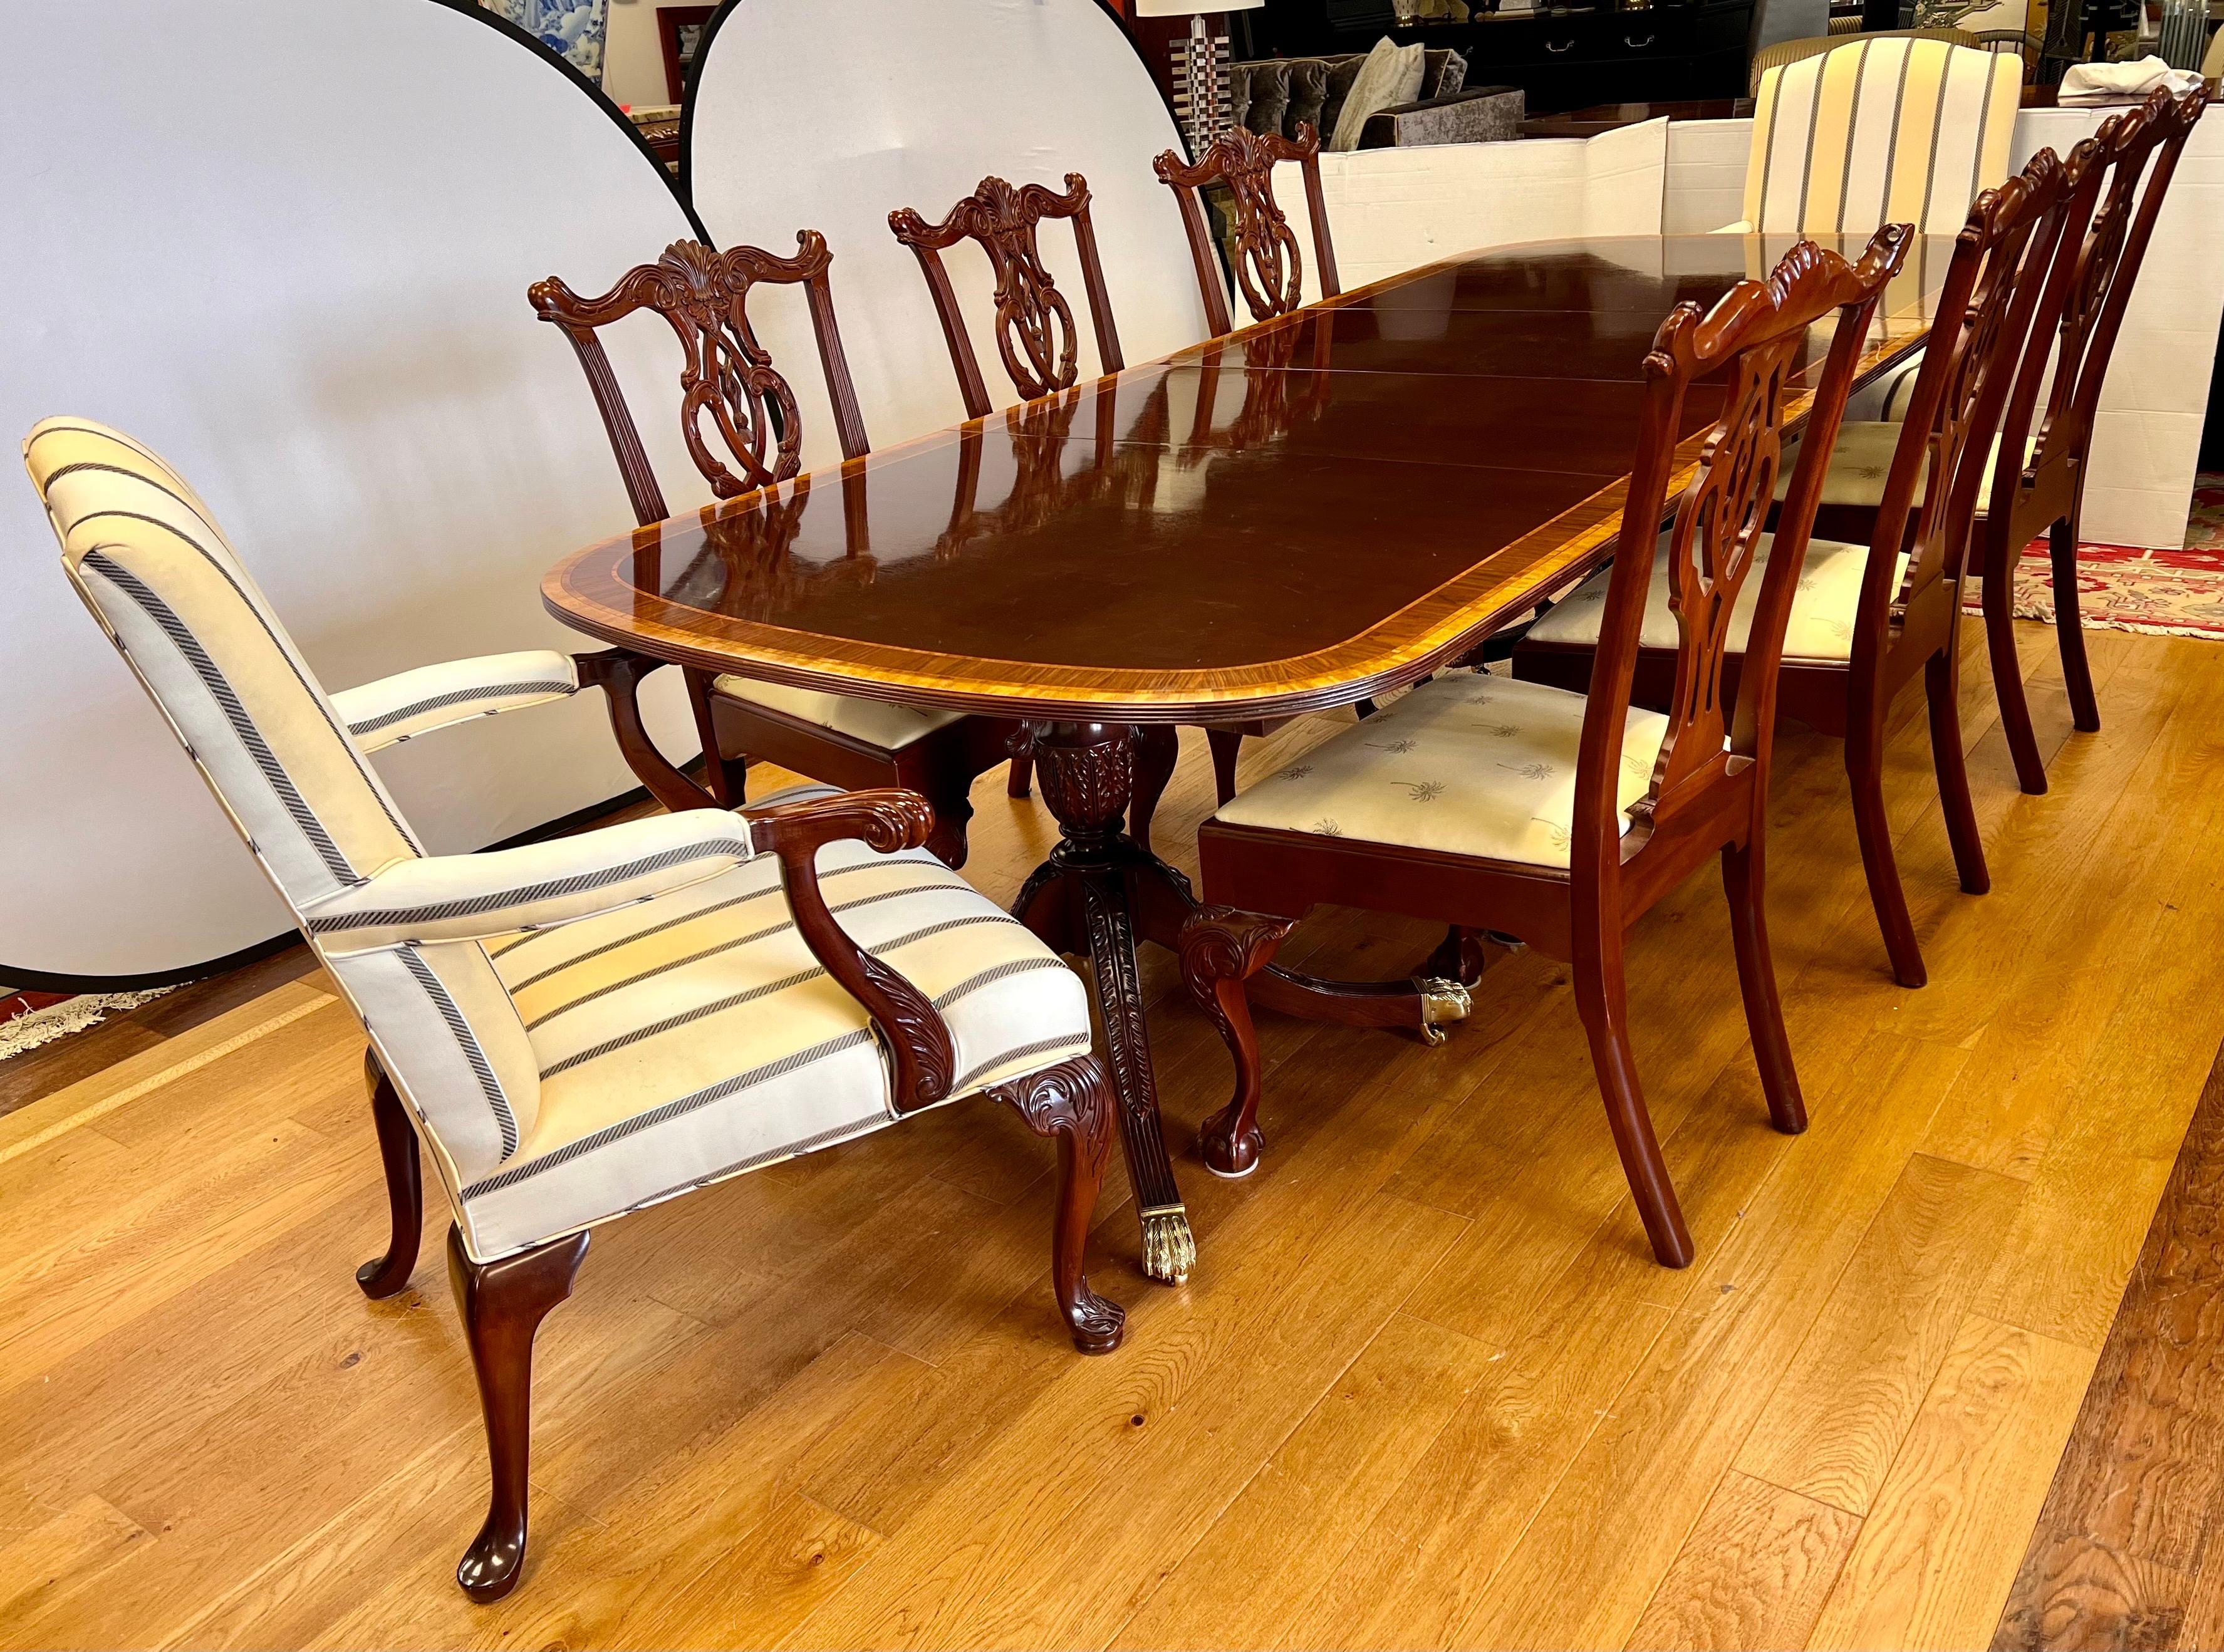 Elegant Councill Craftsman banded mahogany double pedestal dining room table on brass castors for ease of movement. There are eight chairs total, 6 carved mahogany side chairs with ball and claw feet and 2 large upholstered armchairs as shown. There